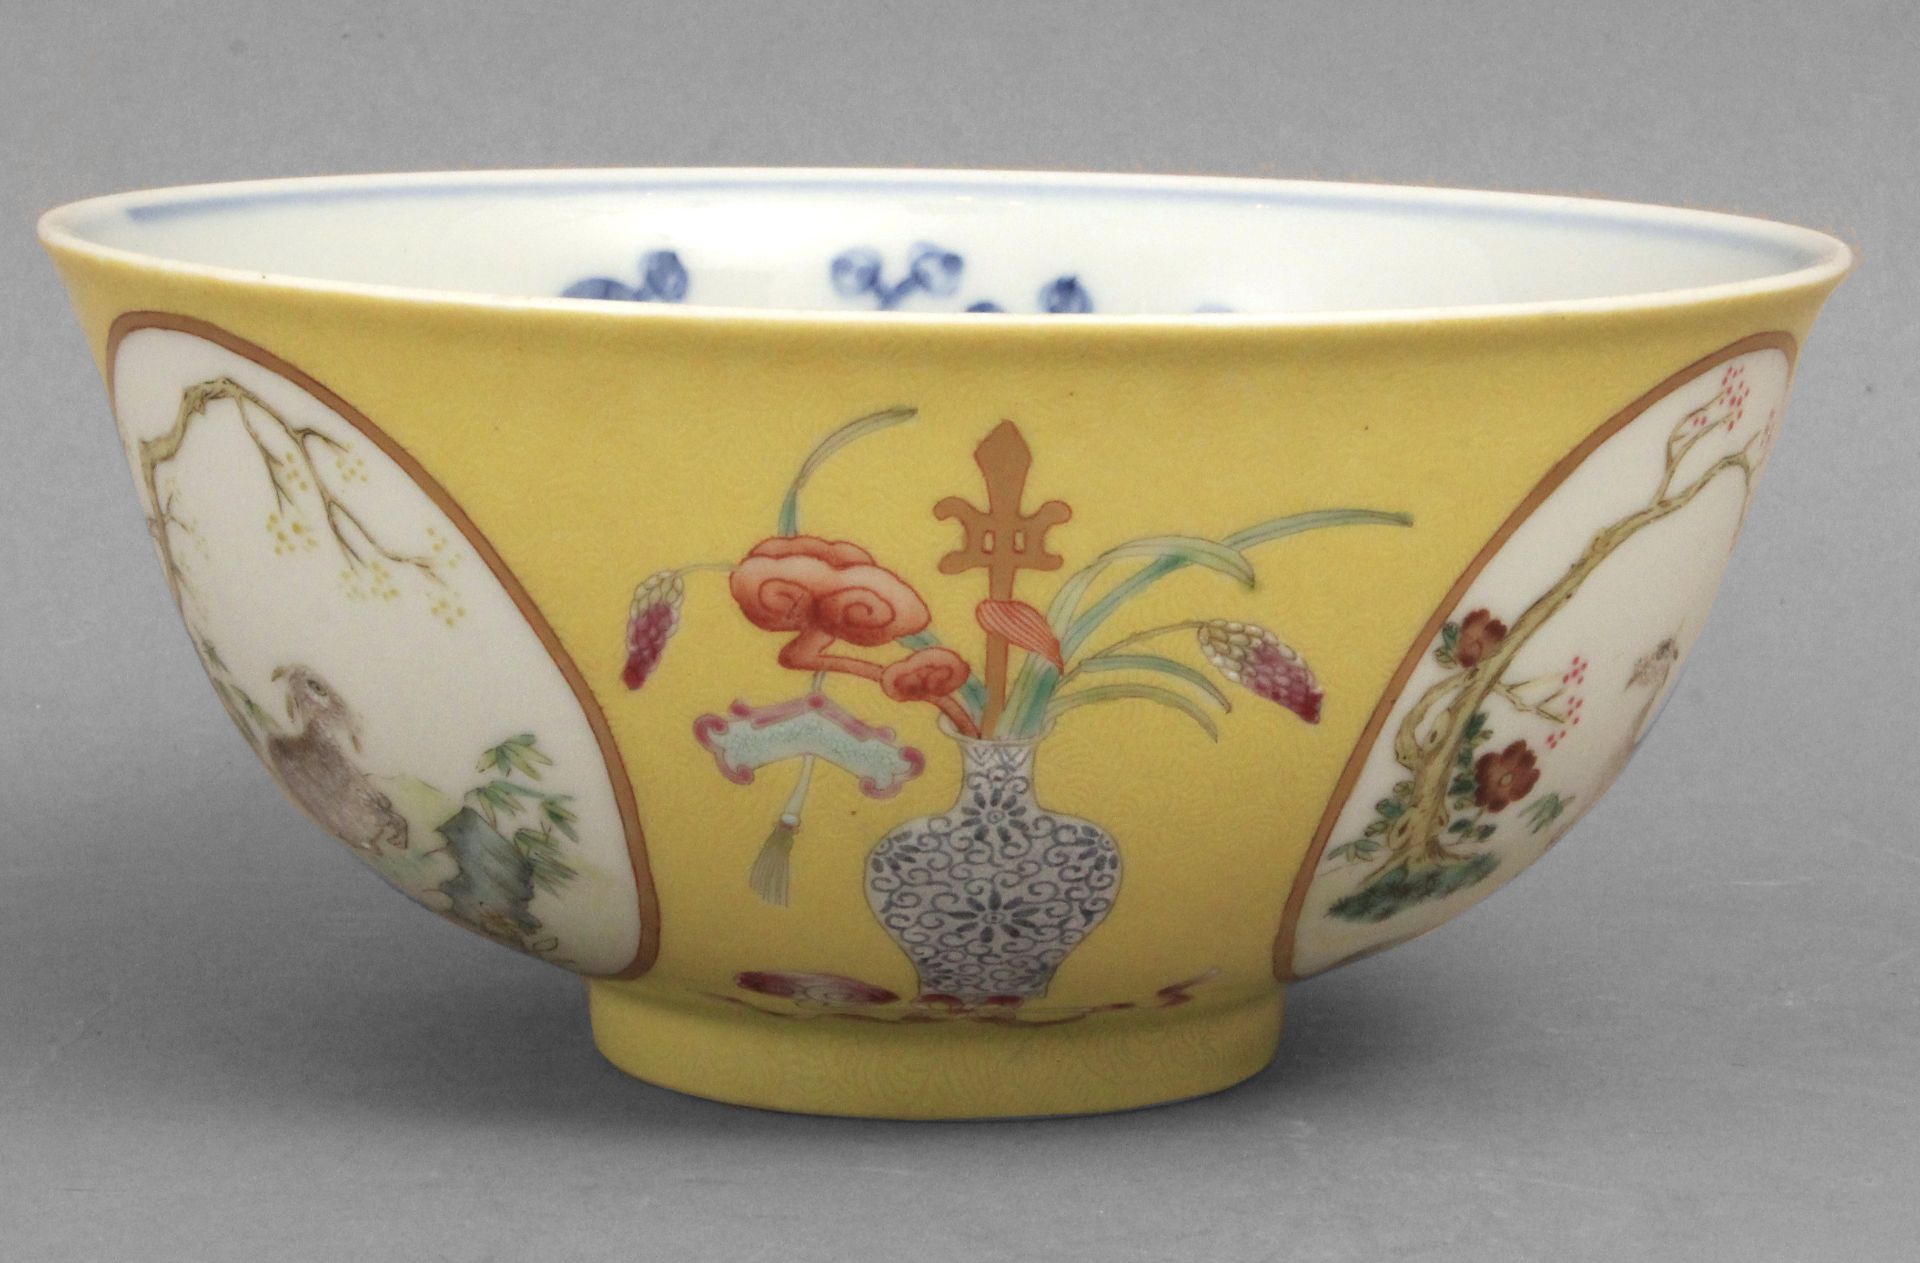 Late 19th century-early 20th century Chinese porcelain bowl - Image 2 of 5